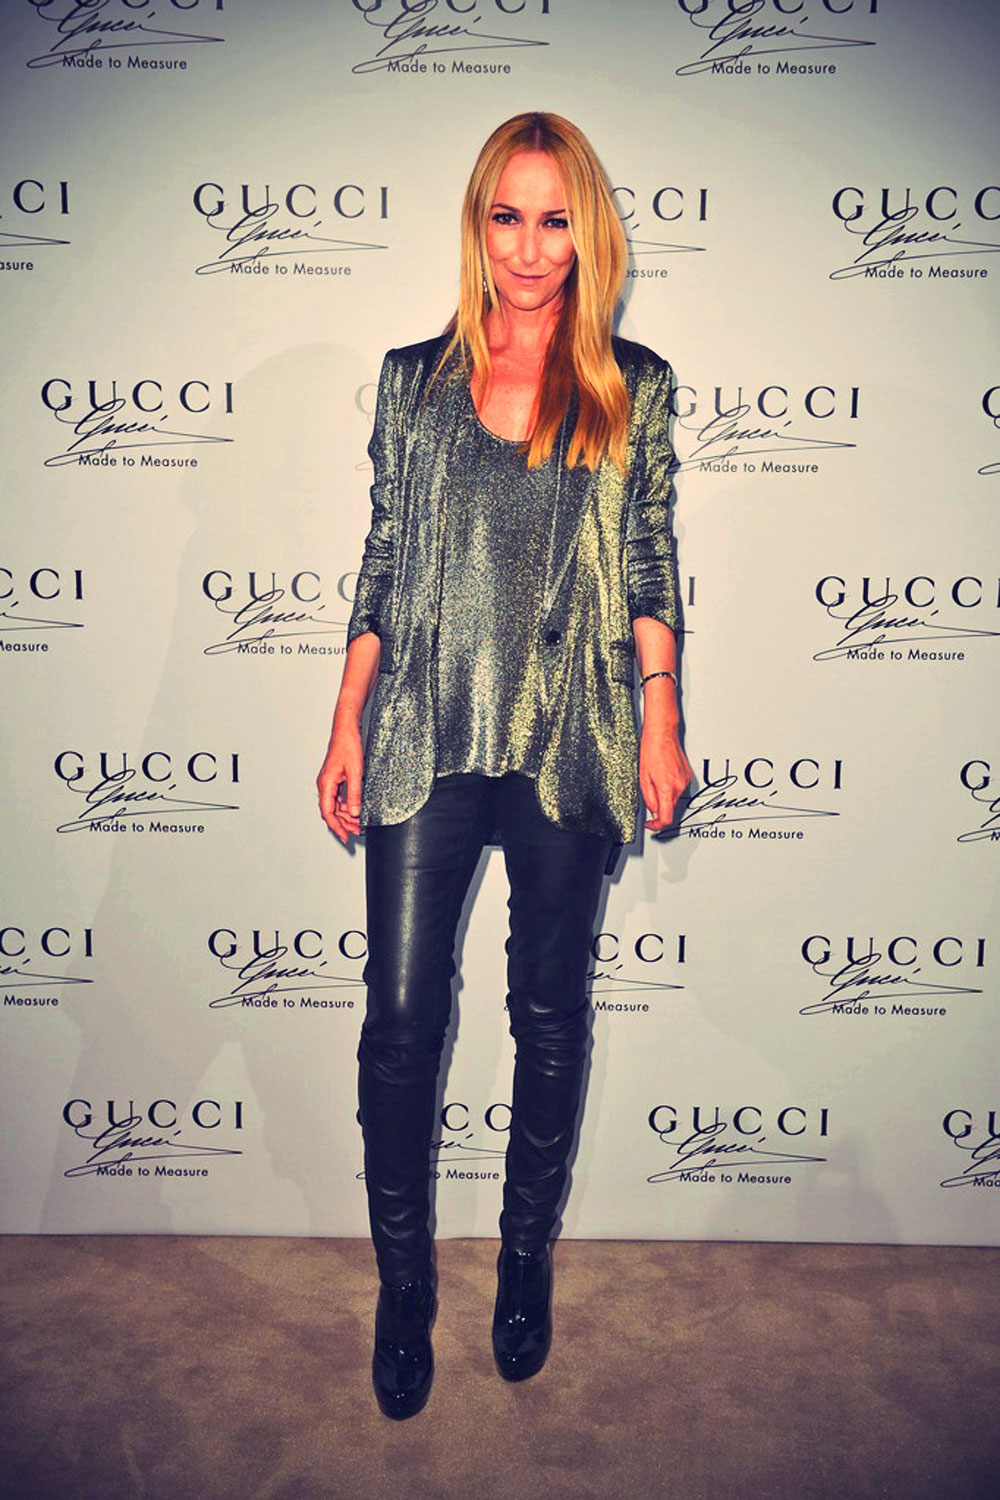 Frida Giannini attends the Guccie Made to Measure launch